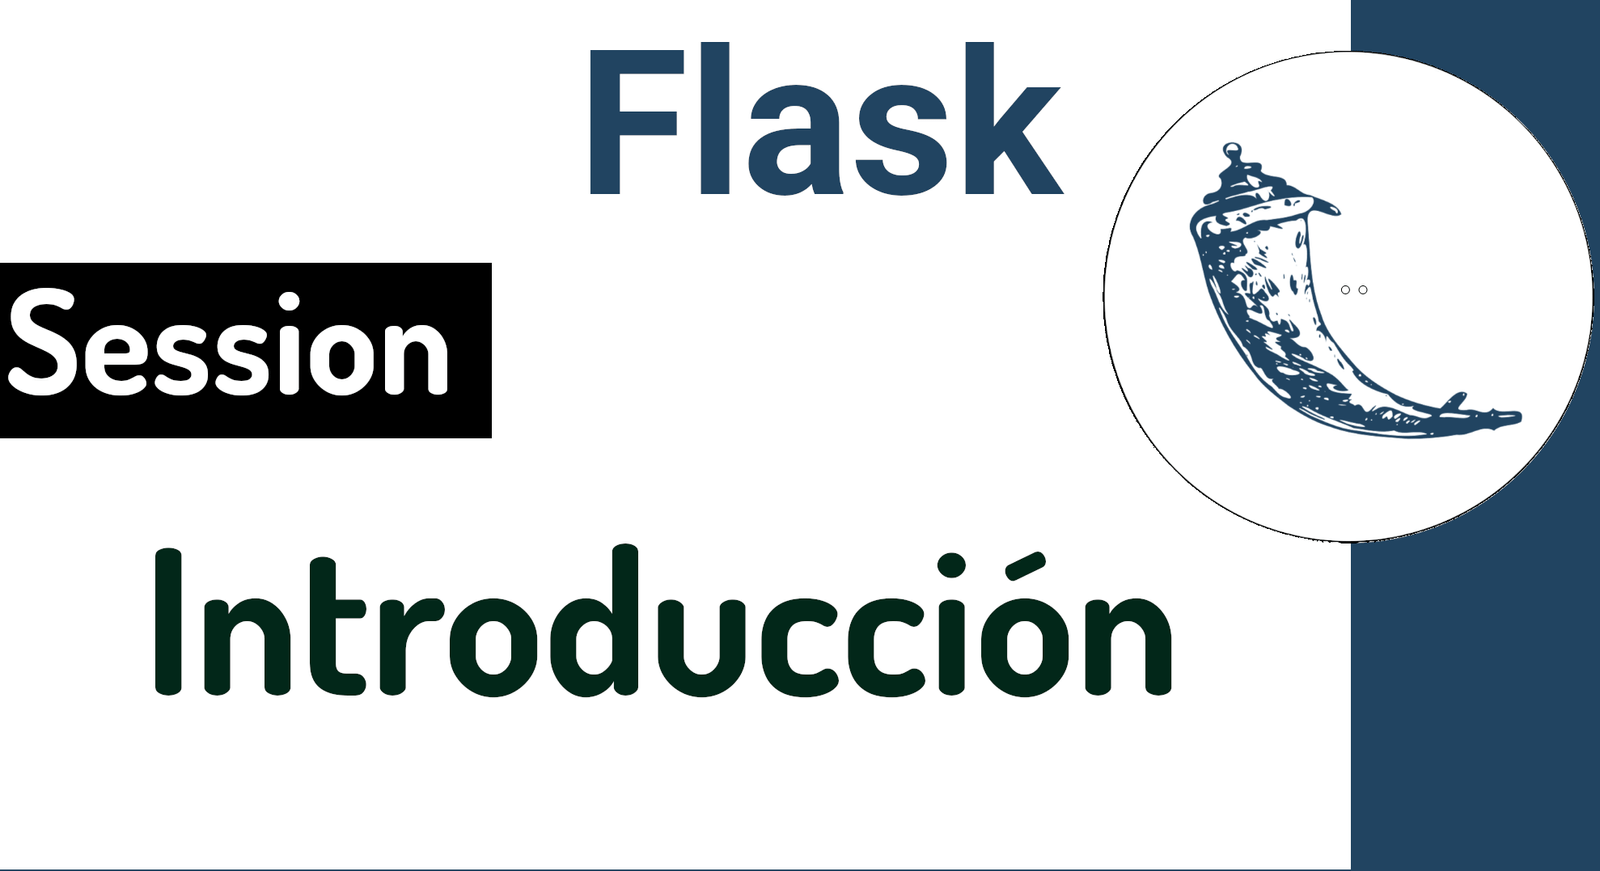 Session in Flask